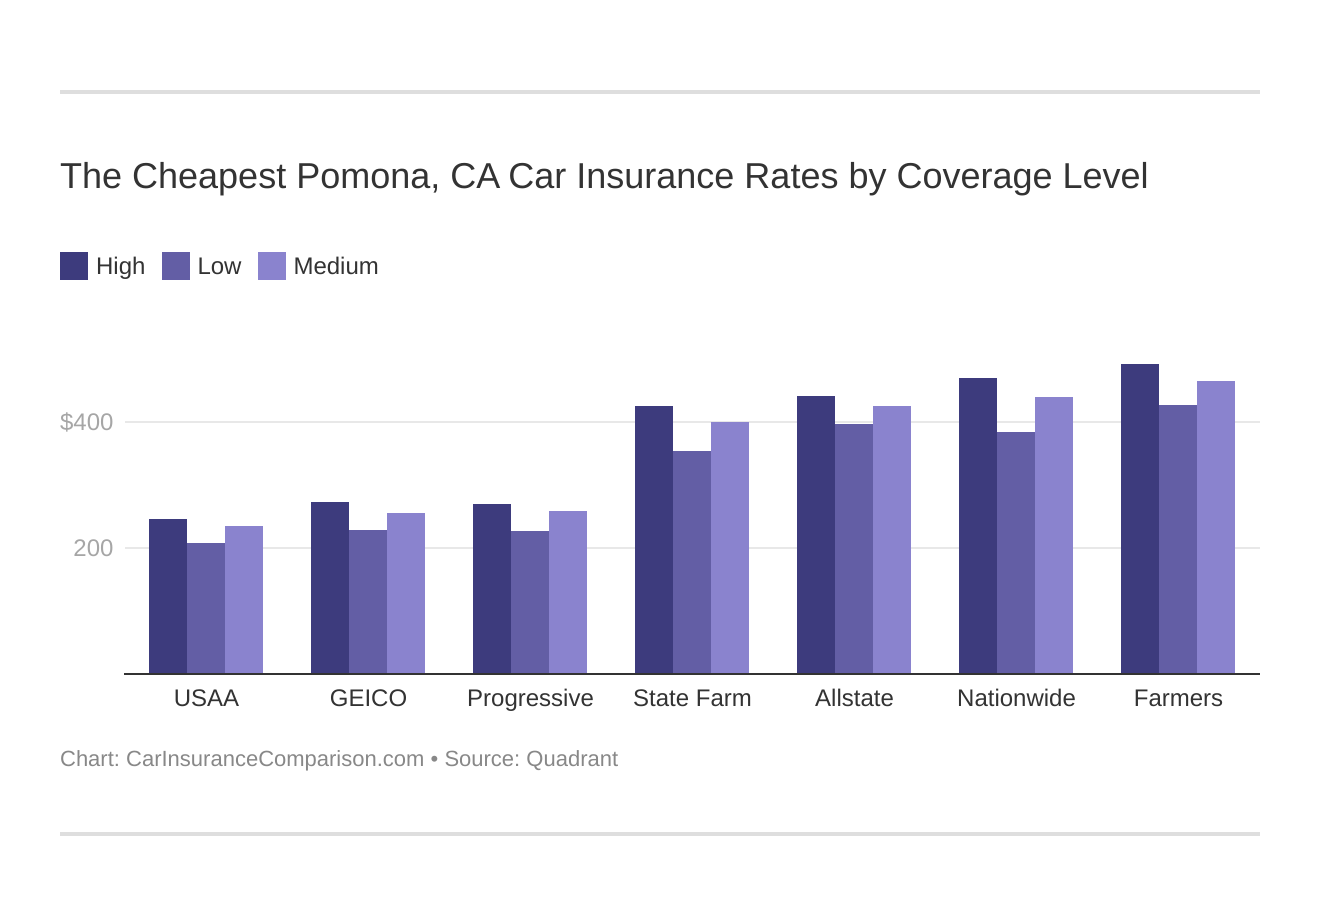 The Cheapest Pomona, CA Car Insurance Rates by Coverage Level